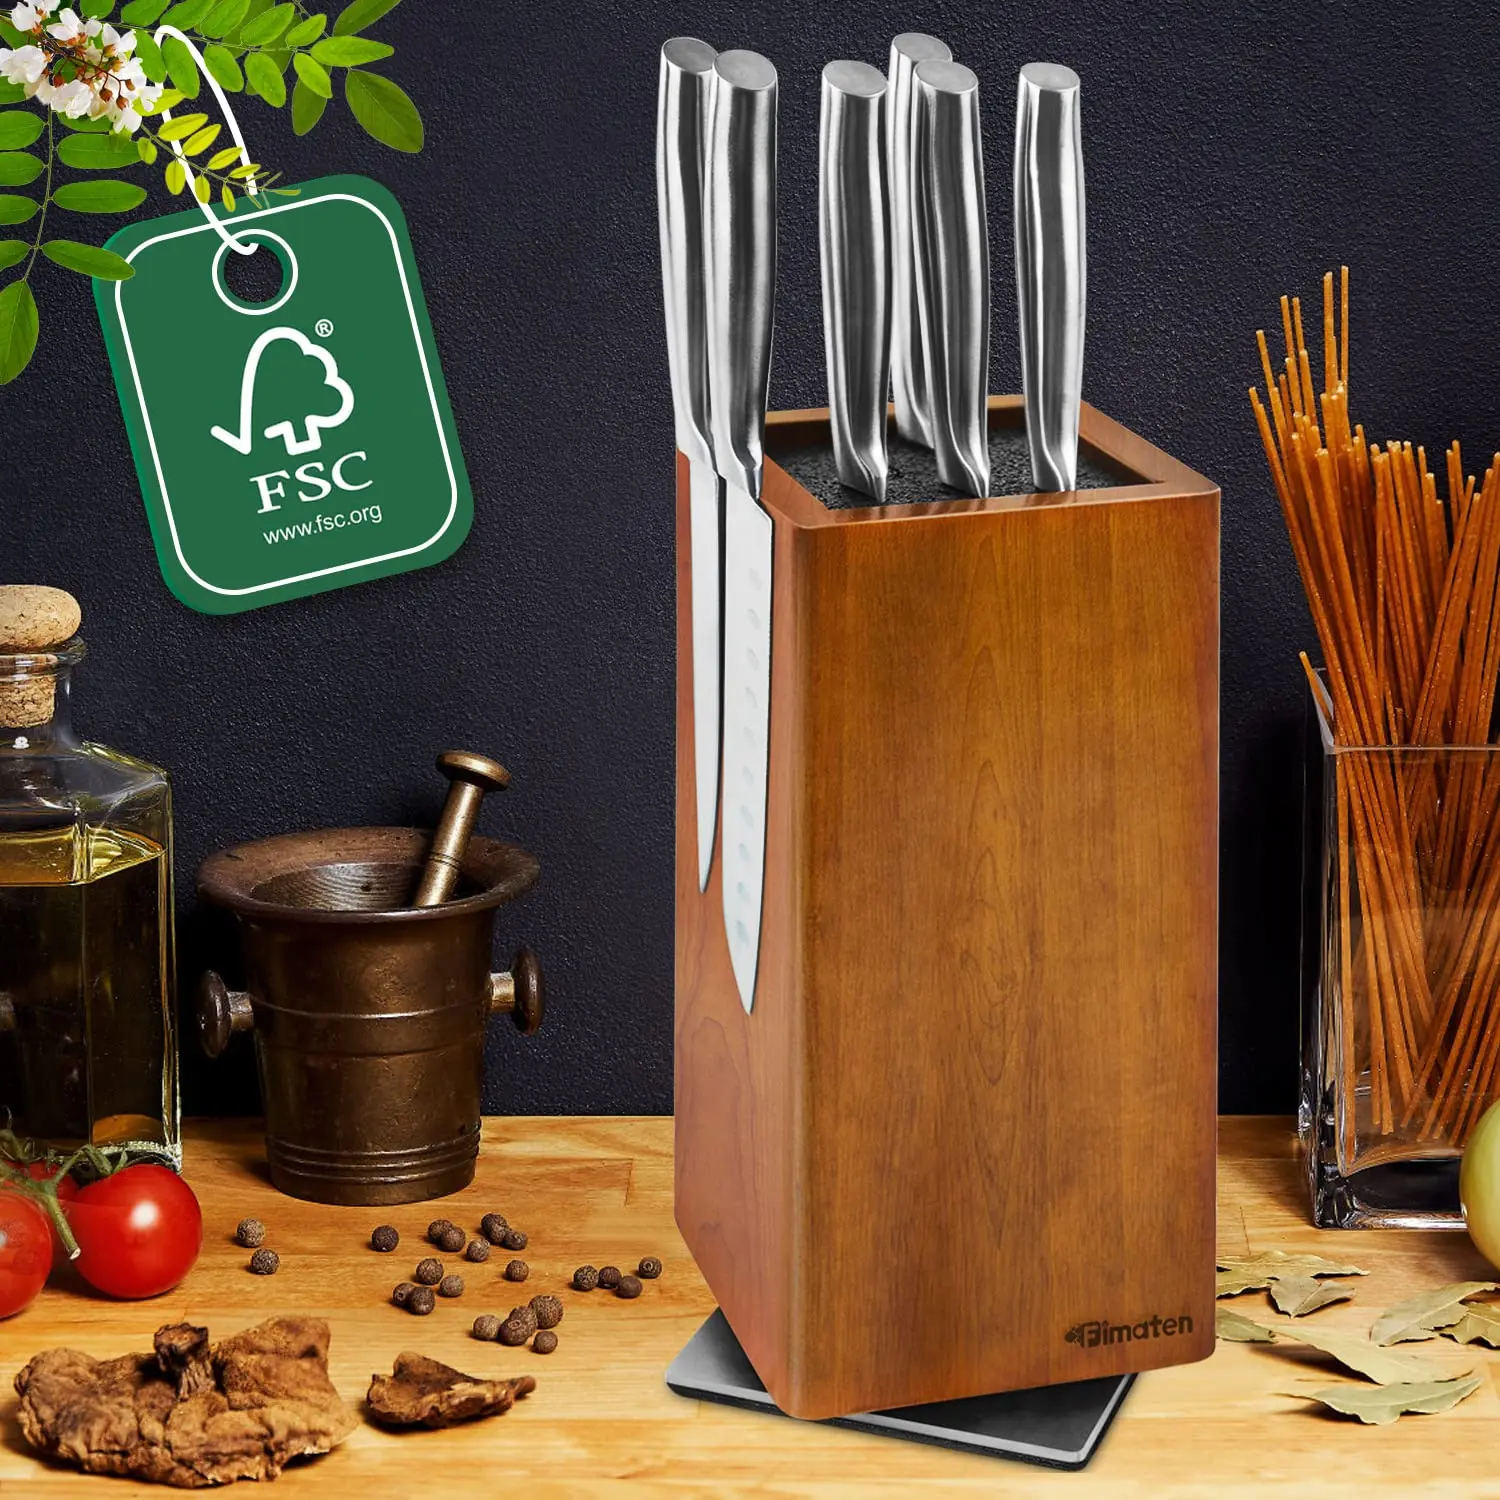 https://ae01.alicdn.com/kf/S720014af2e3546e5bdda85ee7ac3a5fay/Magnetic-Rotating-Wood-Knife-Holder-360-Rotatable-Knife-Block-For-Kitchen-Knives-Storage-With-Anti-Slip.jpg